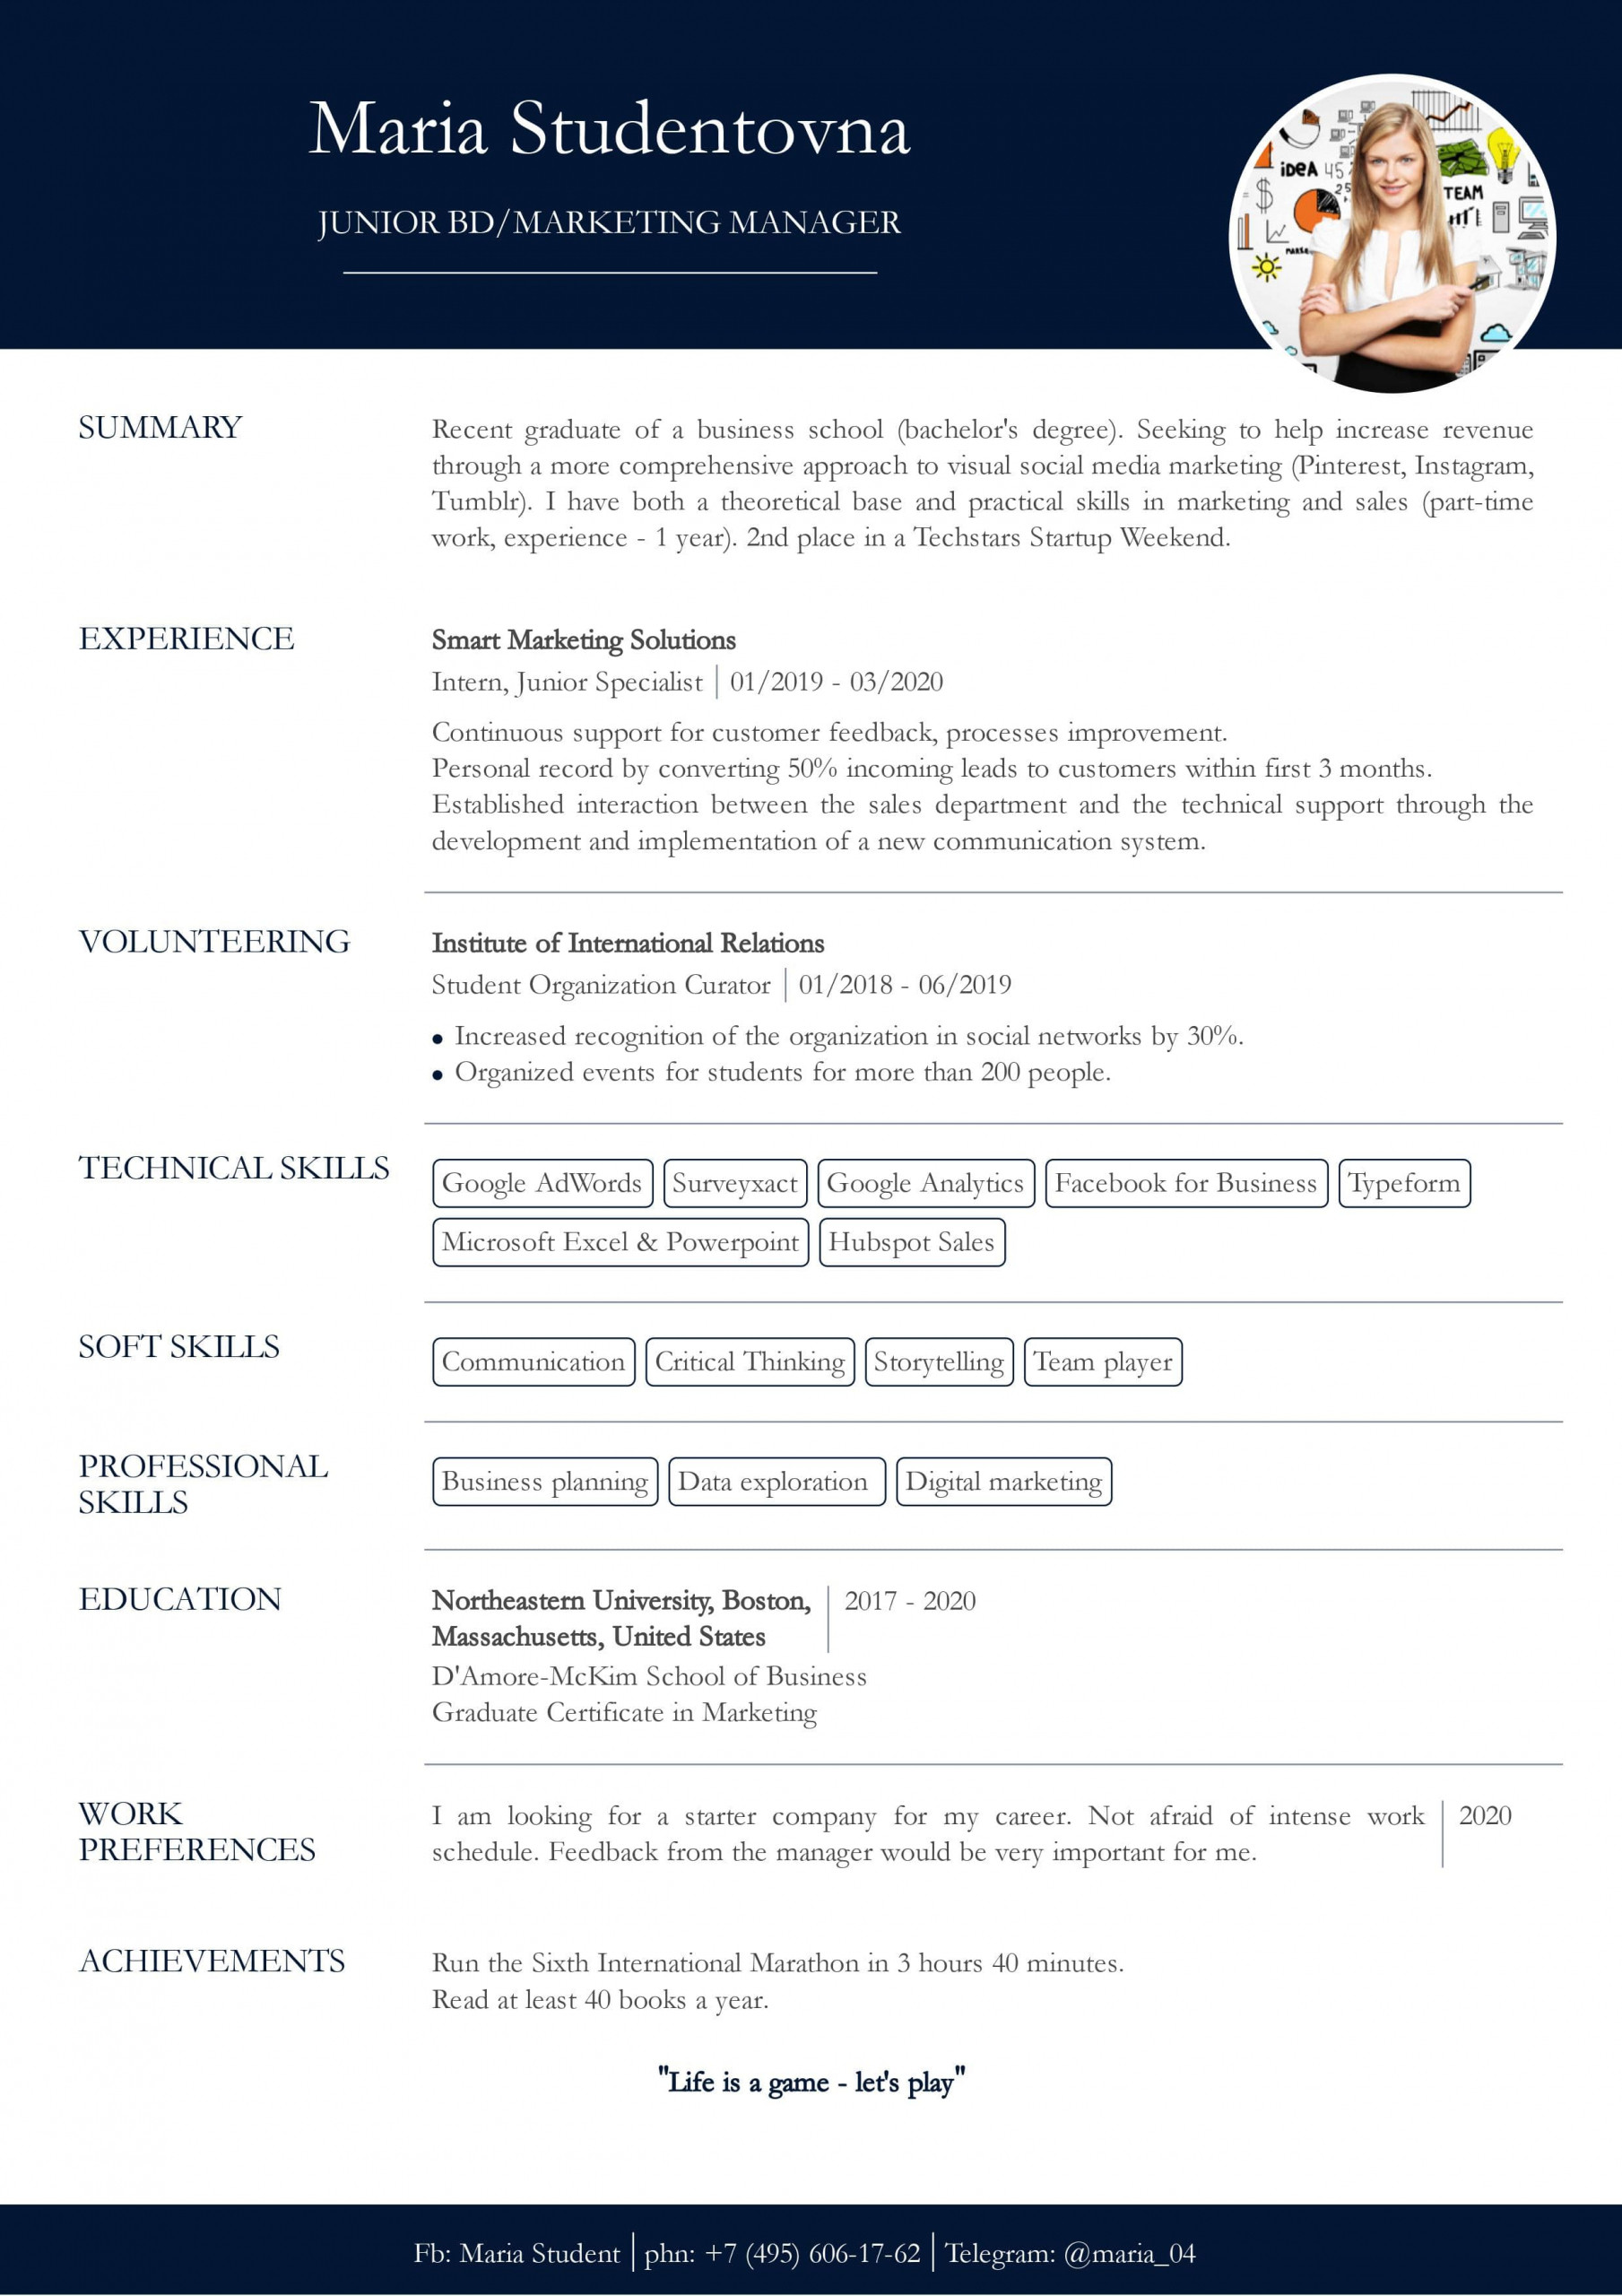 Sample Resume for College Student with No Experience Resume with No Work Experience. Sample for Students. – Cv2you Blog